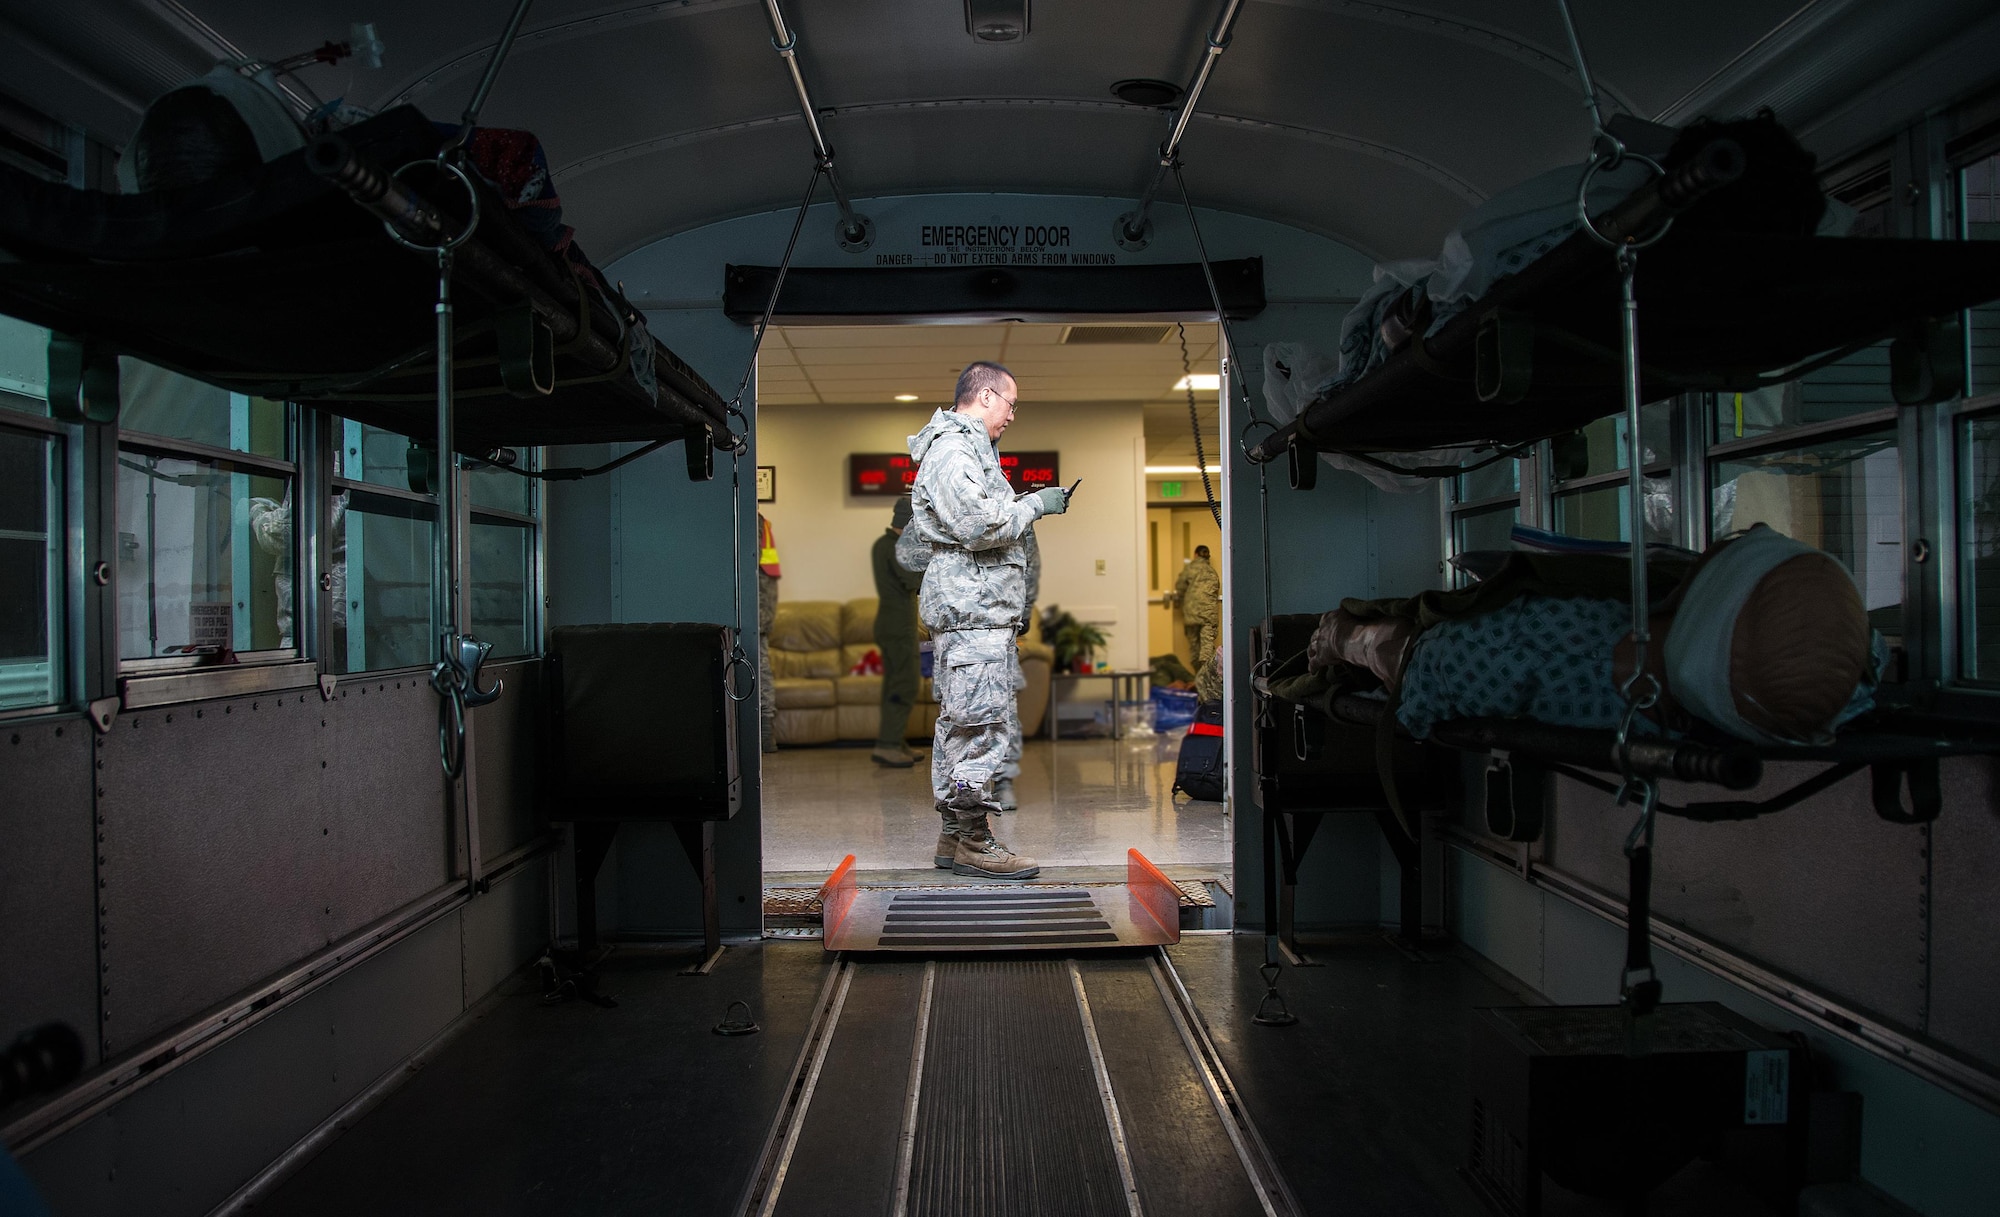 A member of the 60th Inpatient Squadron adjusts a radio so it can receive readiness notifications during Patriot Delta at Travis Air Force Base, Calif. on March 24, 2017. Members of the 60th IPTS participated in the Air Force Reserve exercise Patriot Delta, providing enroute patient care and staging the medical manikins. (U.S. Air Force photo by Staff Sgt. Daniel Phelps)